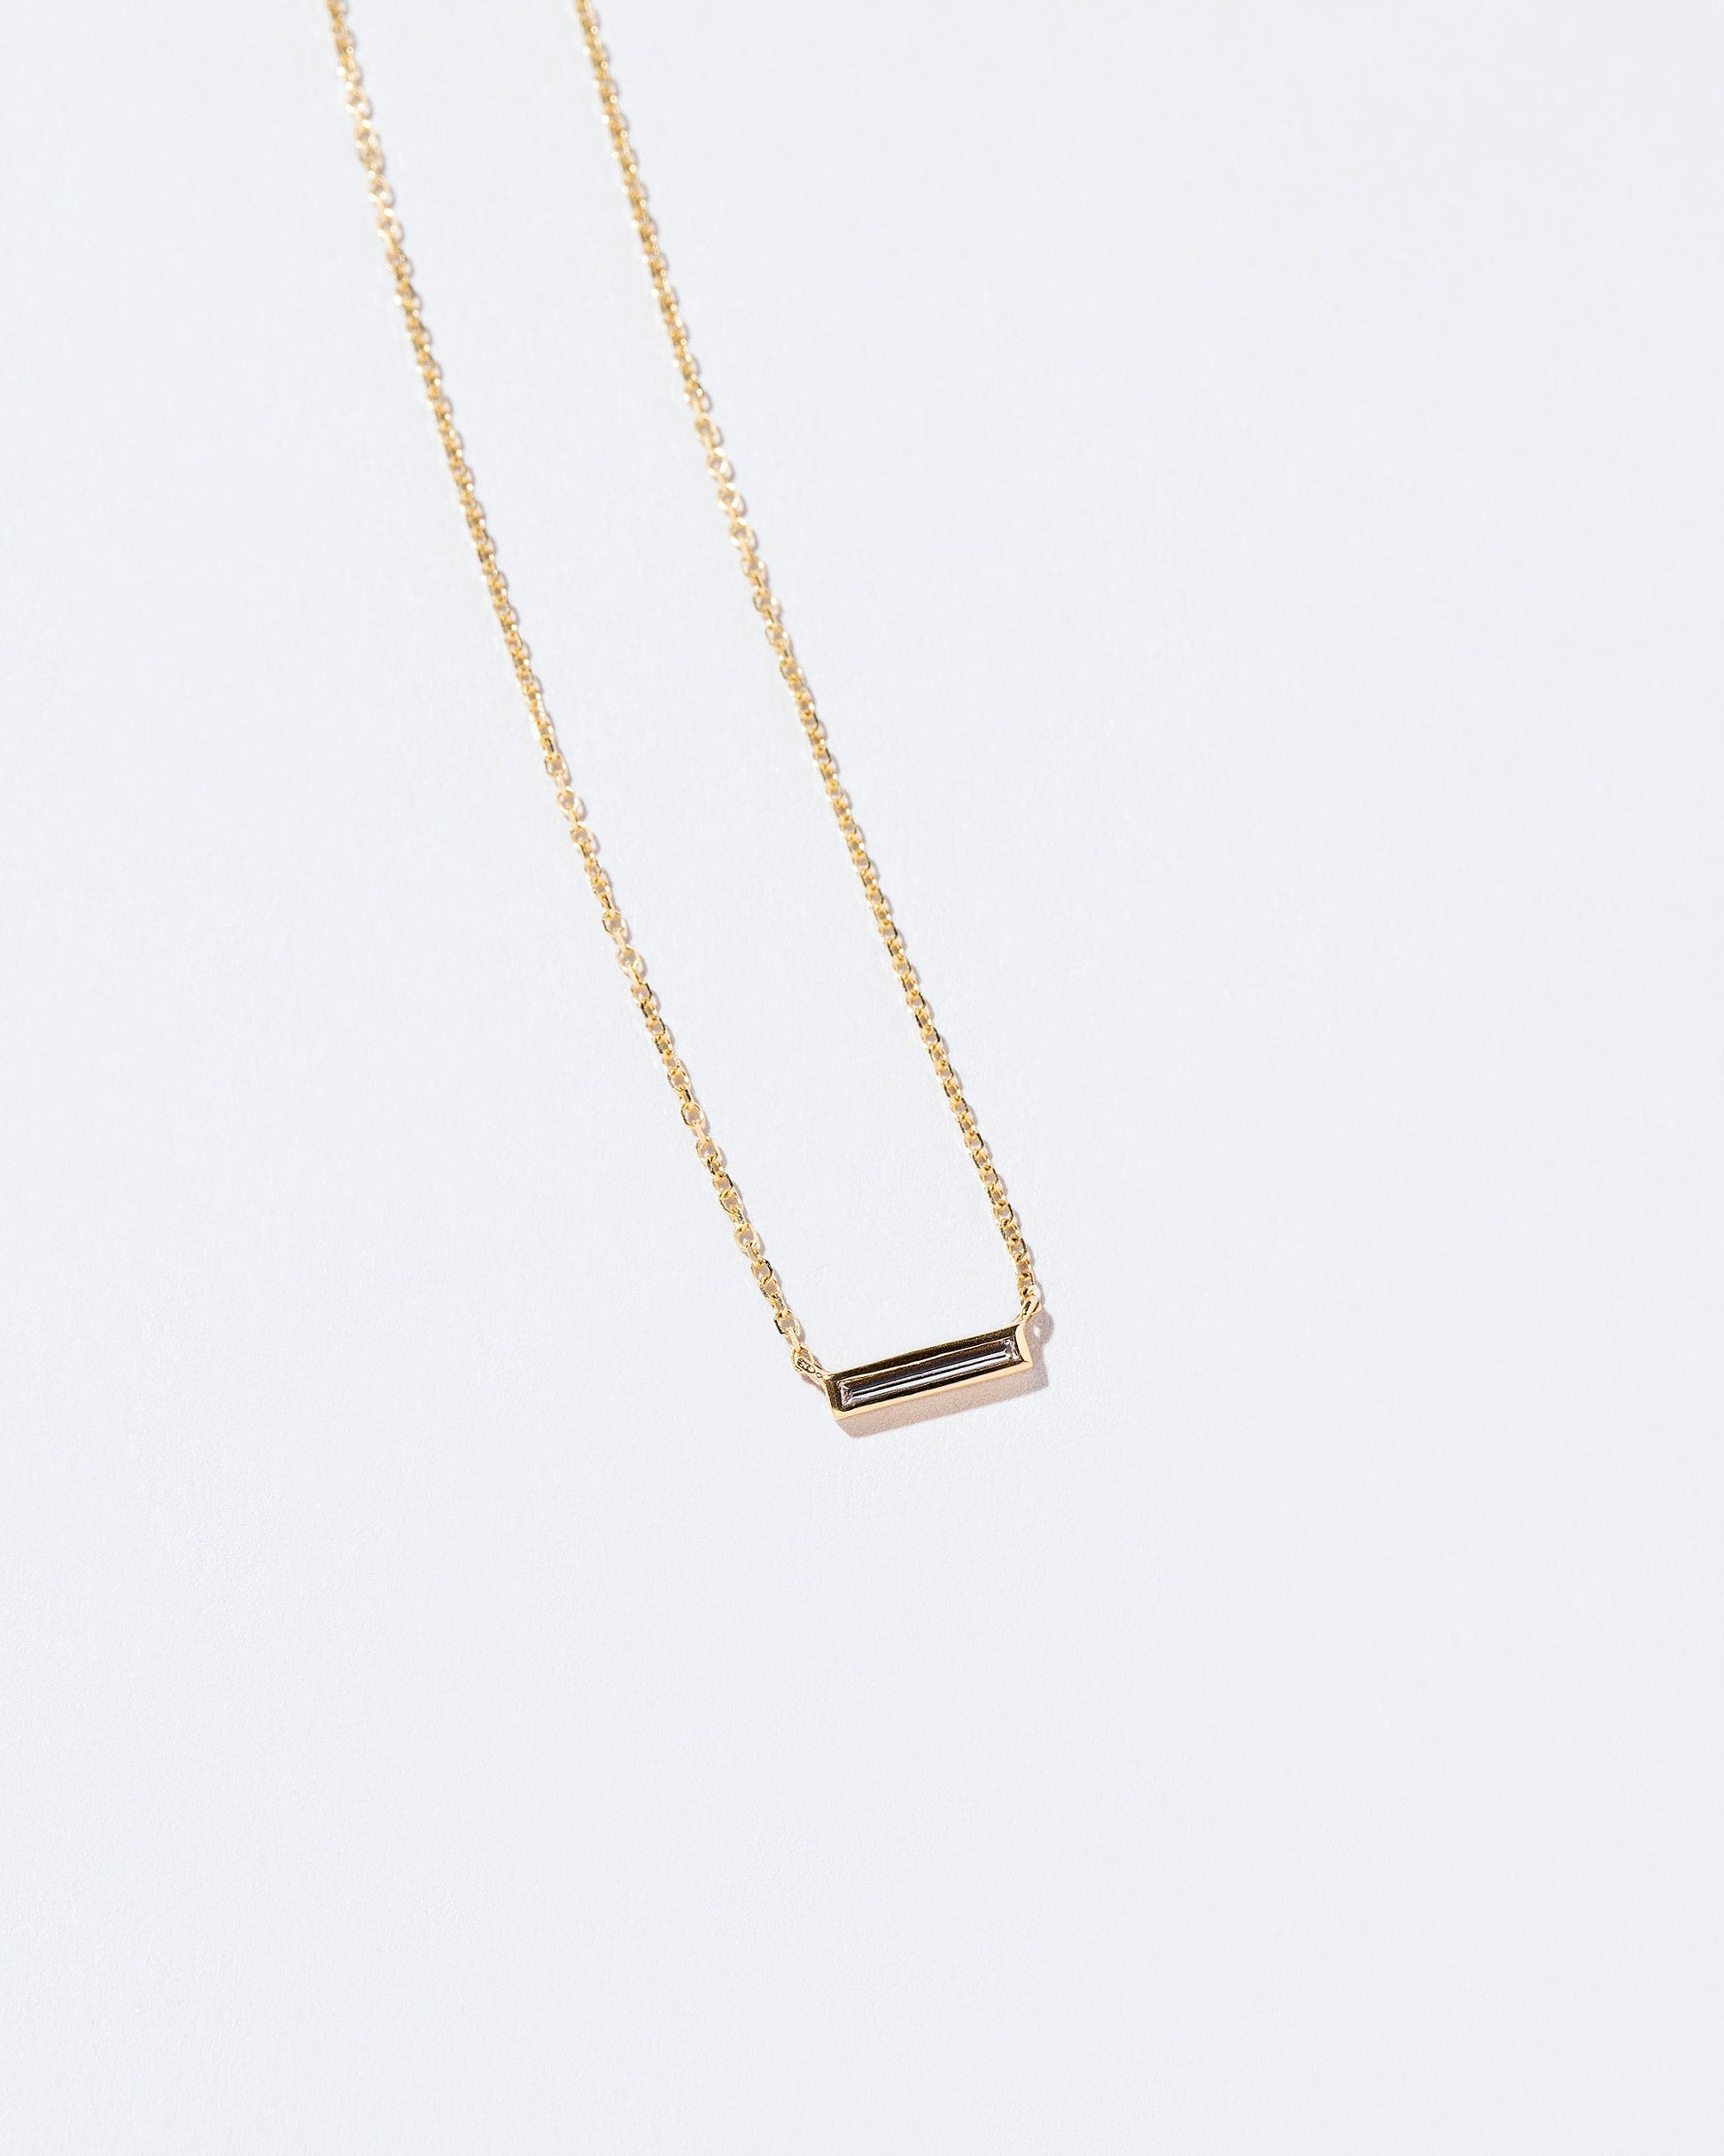  Cayo Necklace on light color background.